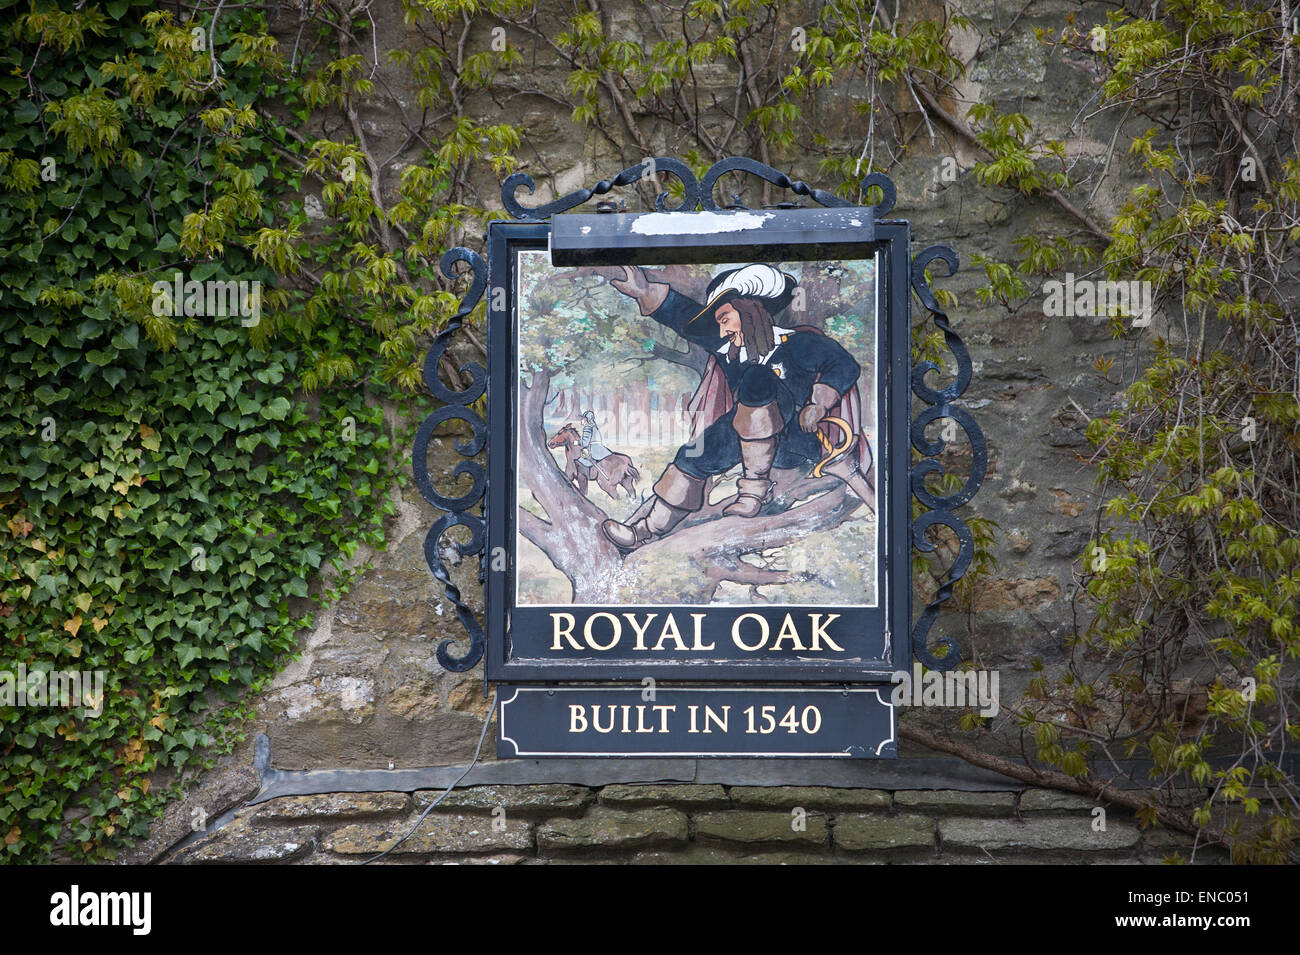 The Royal oak Pub in Cerne Abbas Built in 1540 Stock Photo